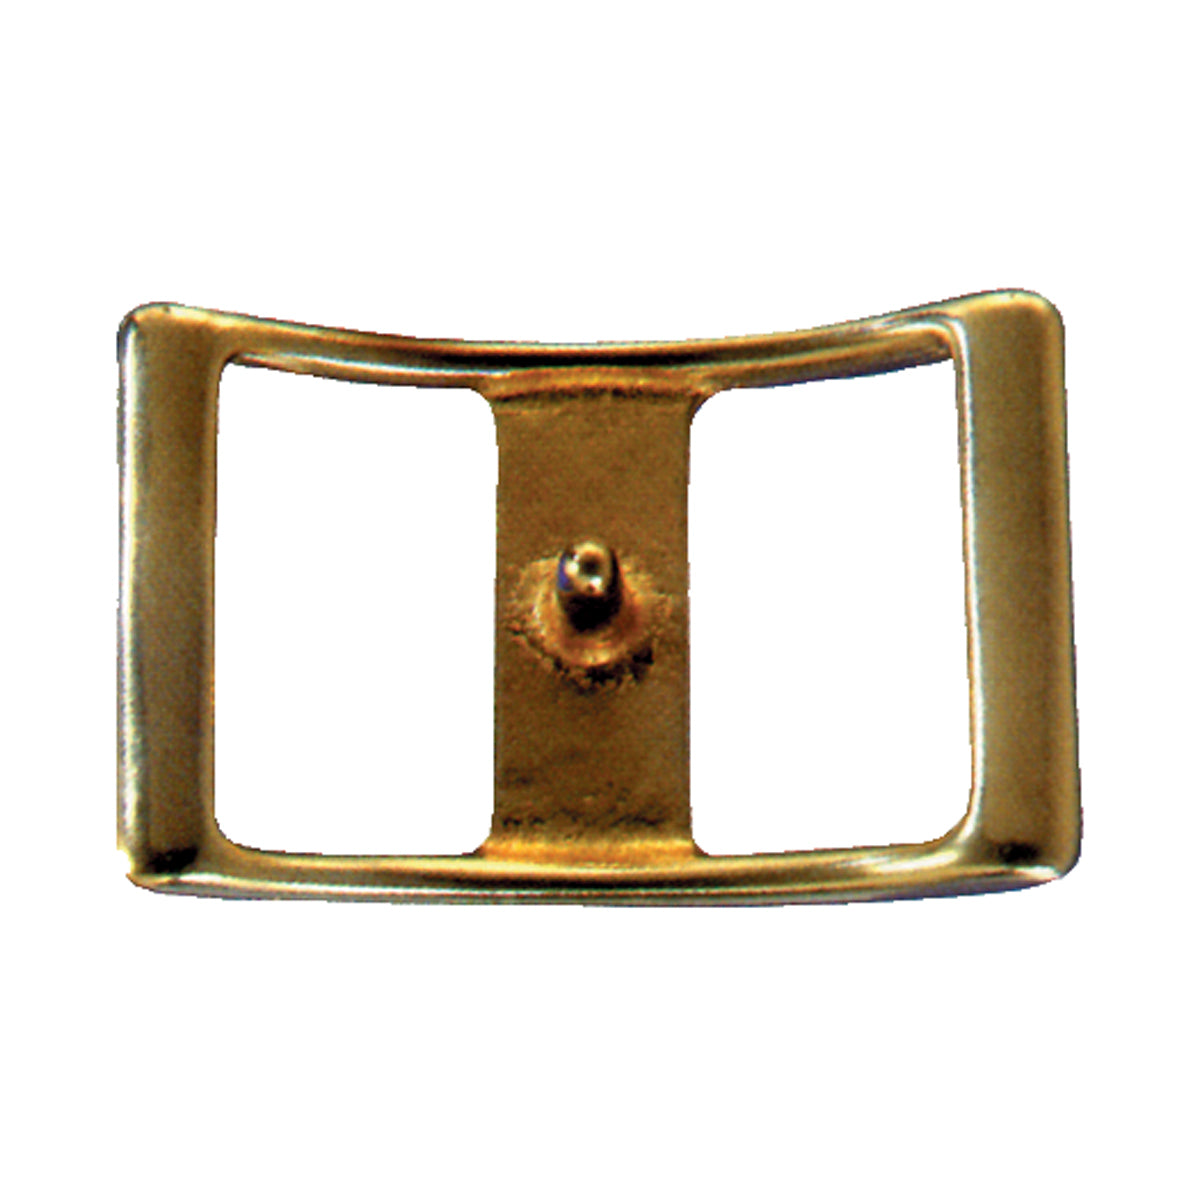 12 Solid Brass High Plush Buckle 5/8 with 3.2mm Tongue